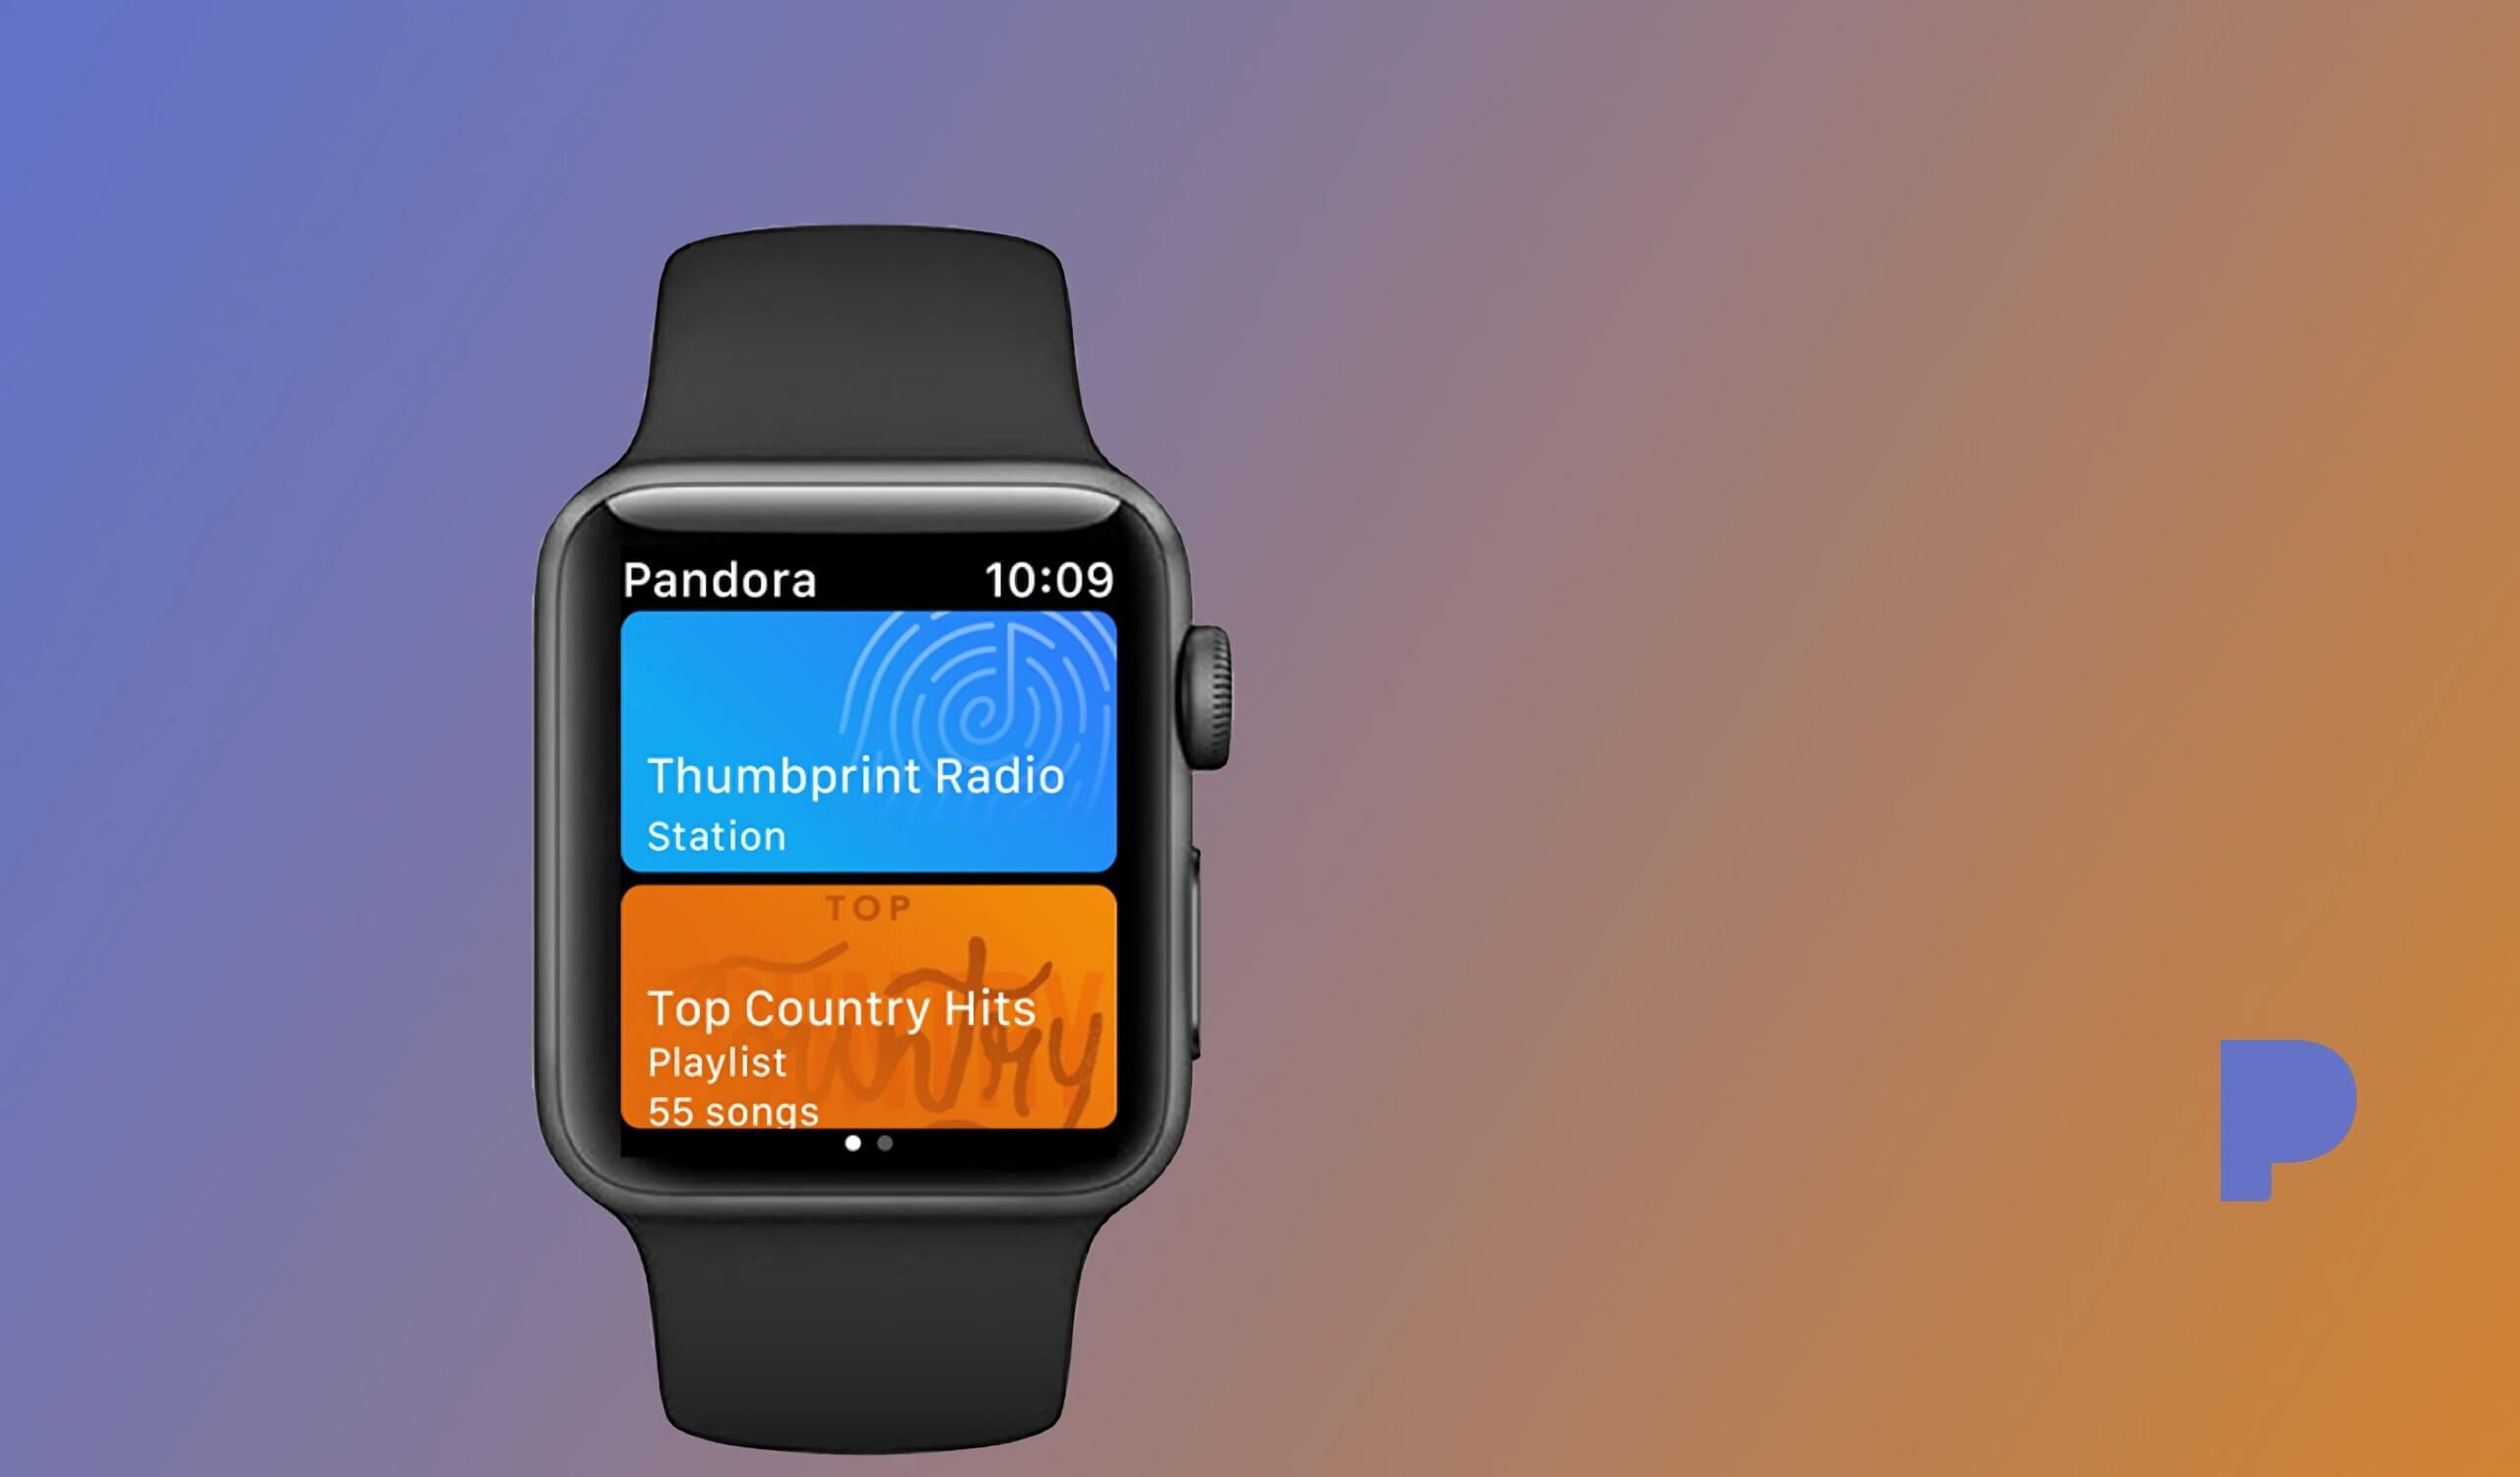 Pandora will now let Apple Watch users stream music untethered